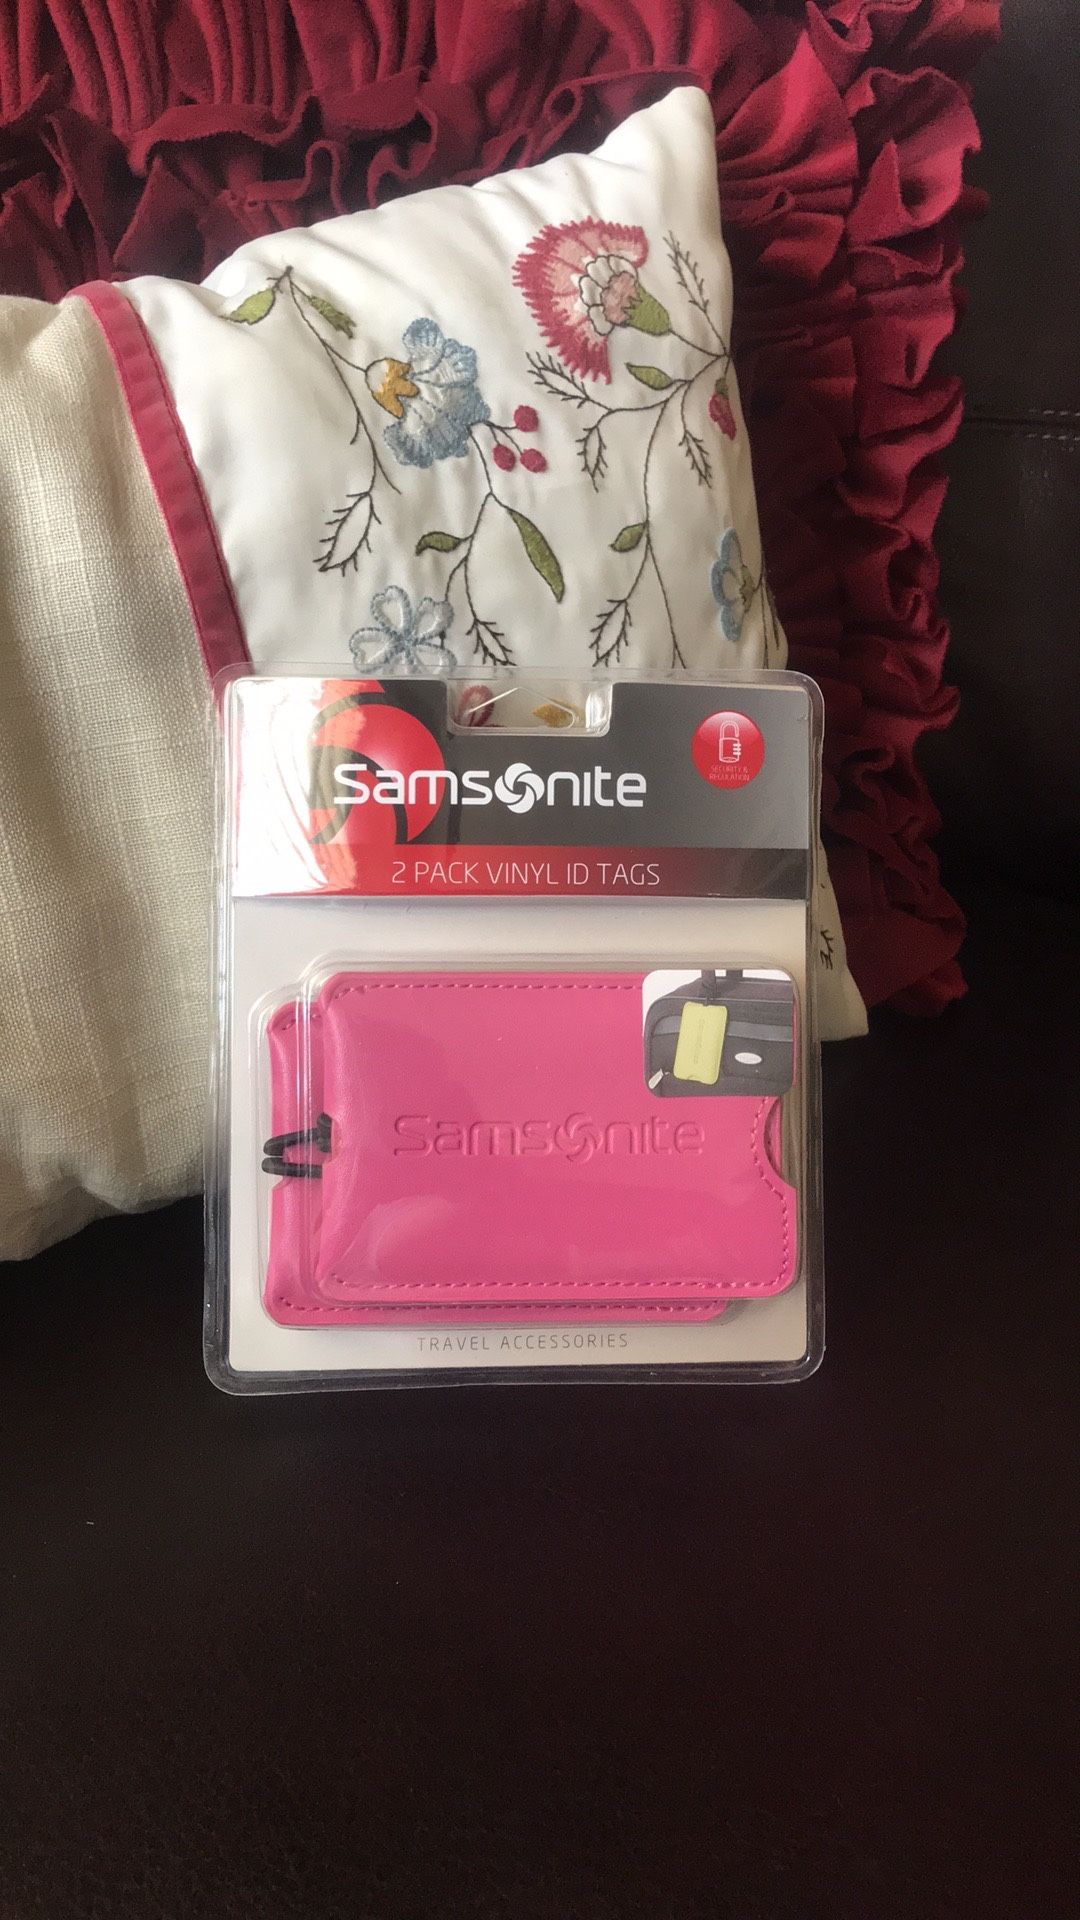 Samsnite Vinyl ID Tags 2 PACK- Hot Pink- LUGGAGE TAGS. Condition is New.